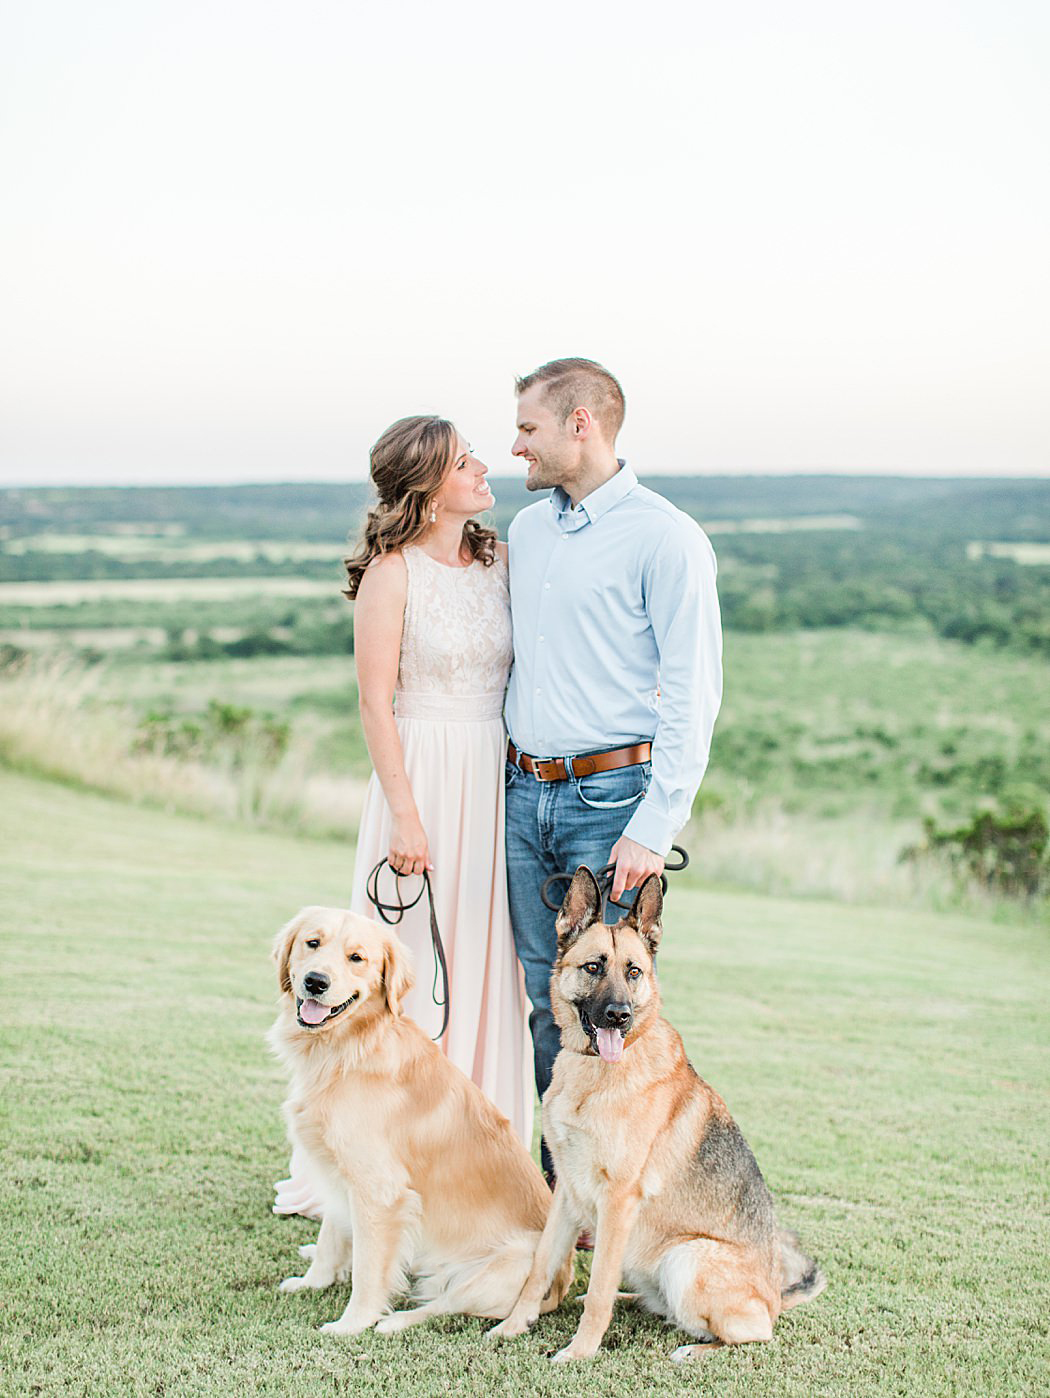 Contigo Ranch Engagement Session in Fredericksburg texas by Allison Jeffers Photography 0067